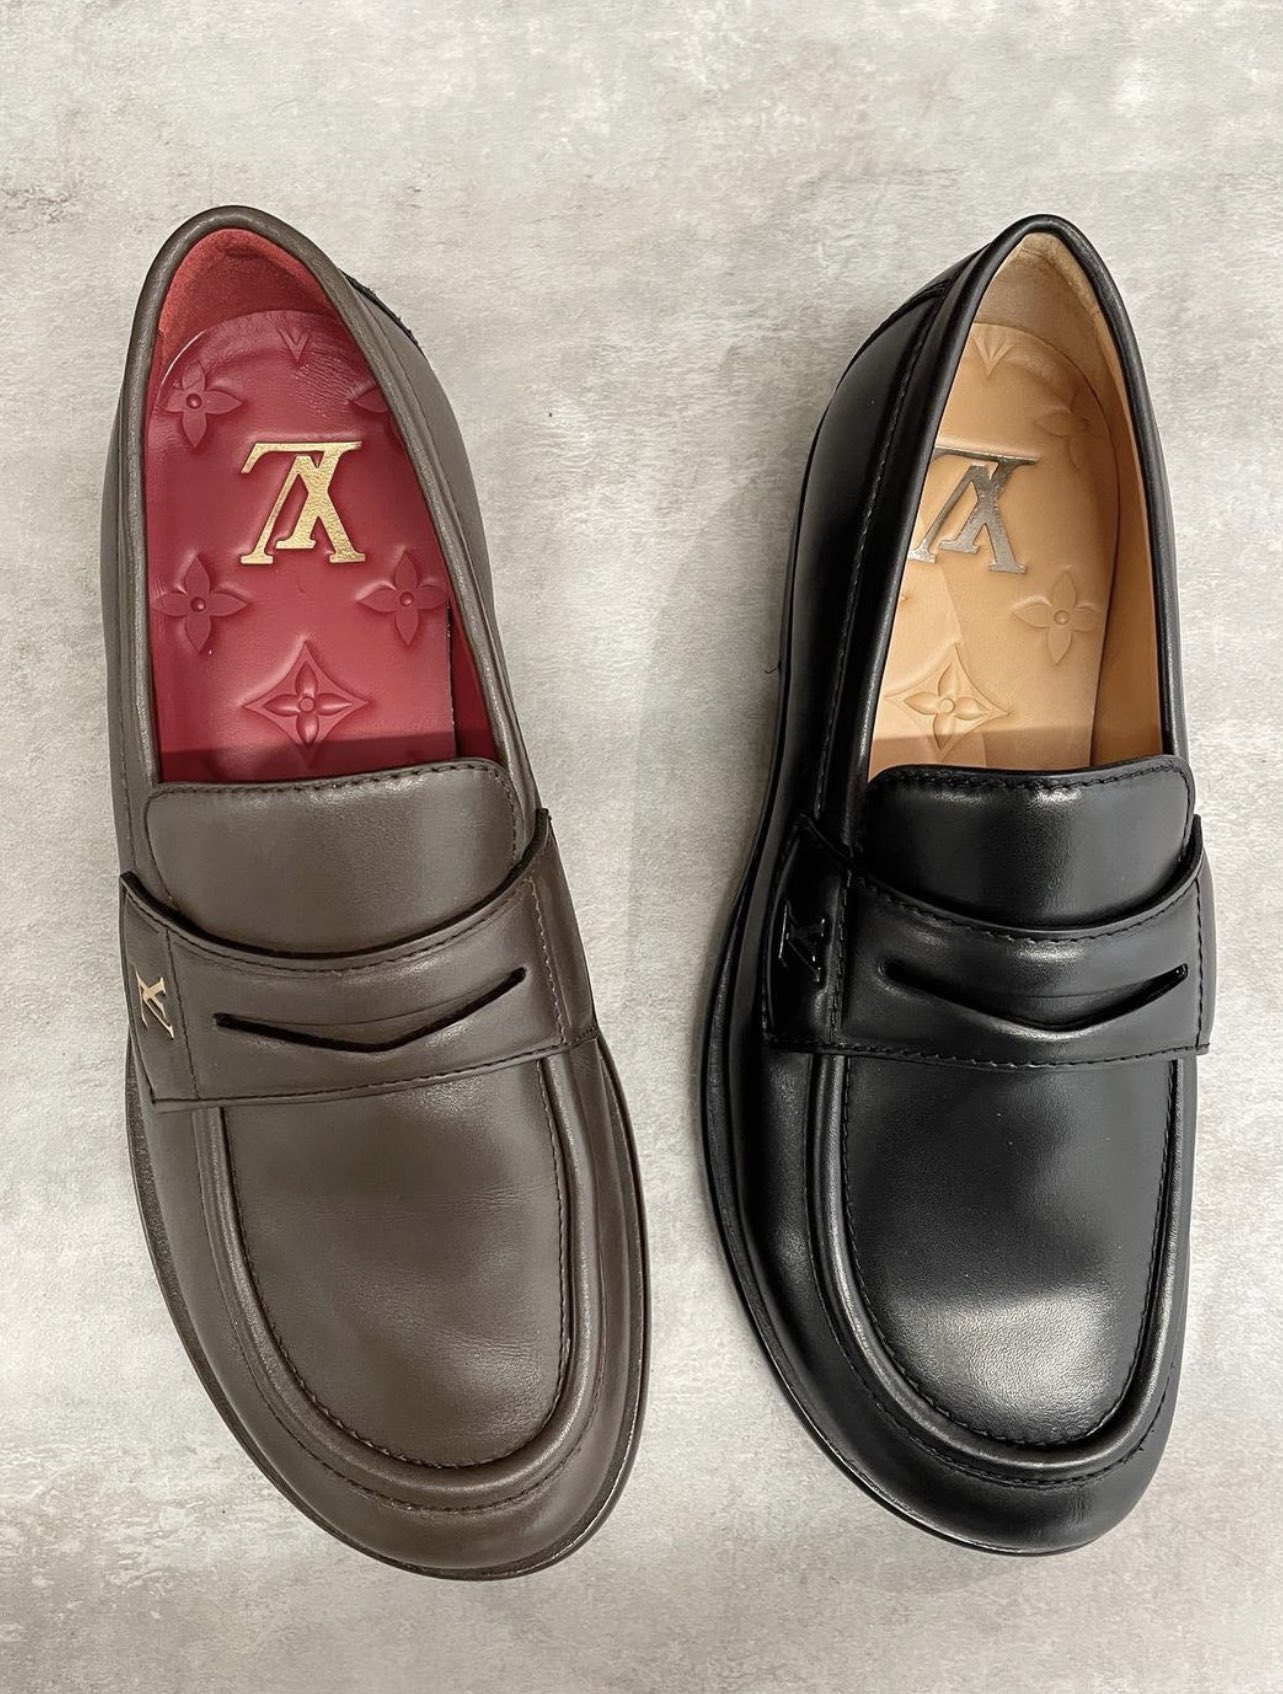 Outlander Magazine on X: Loafers by Louis Vuitton (2023) https